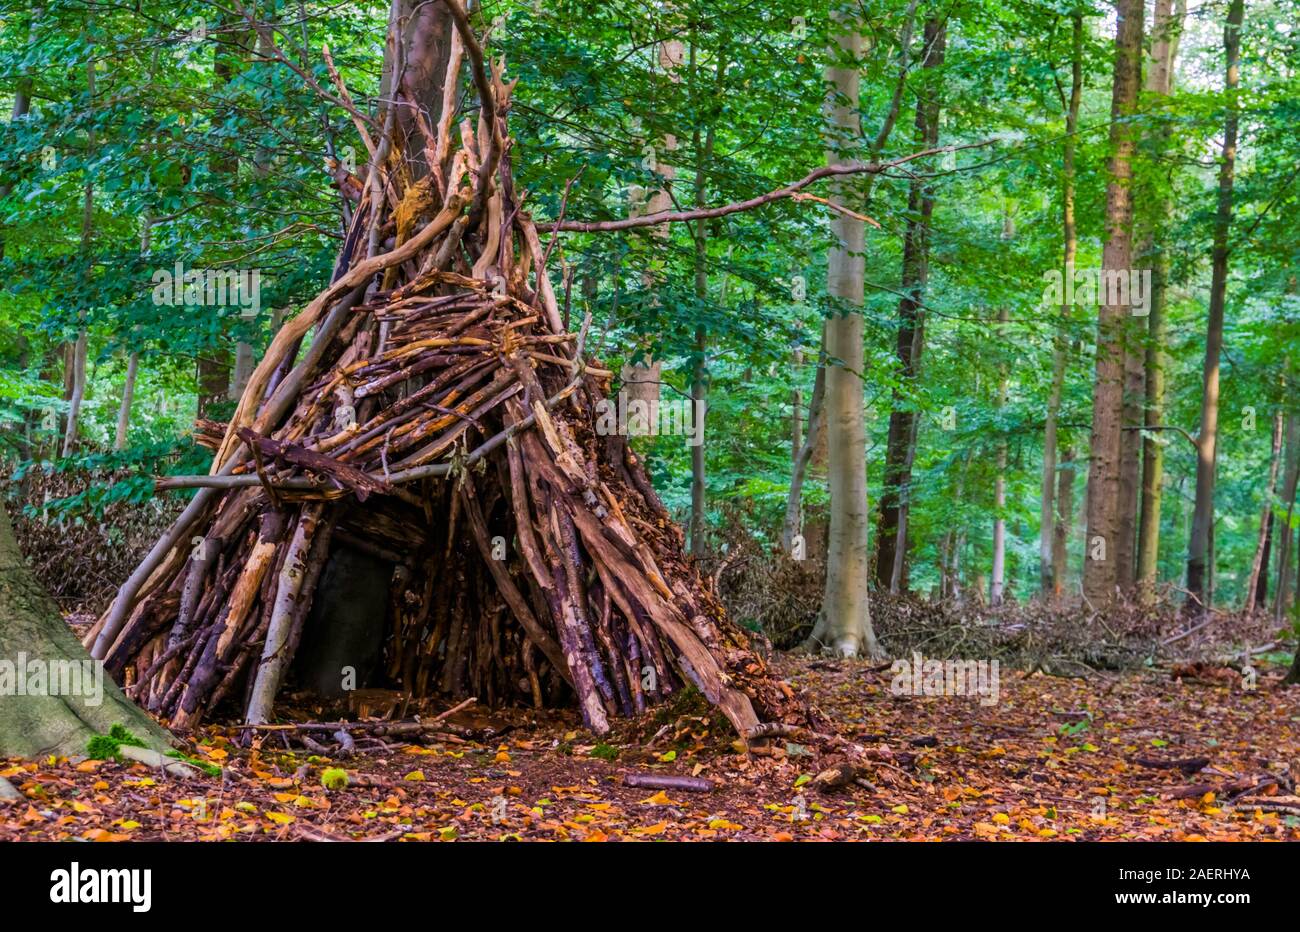 Tree hut made out of branches in the liesbos forest of breda, The netherlands Stock Photo